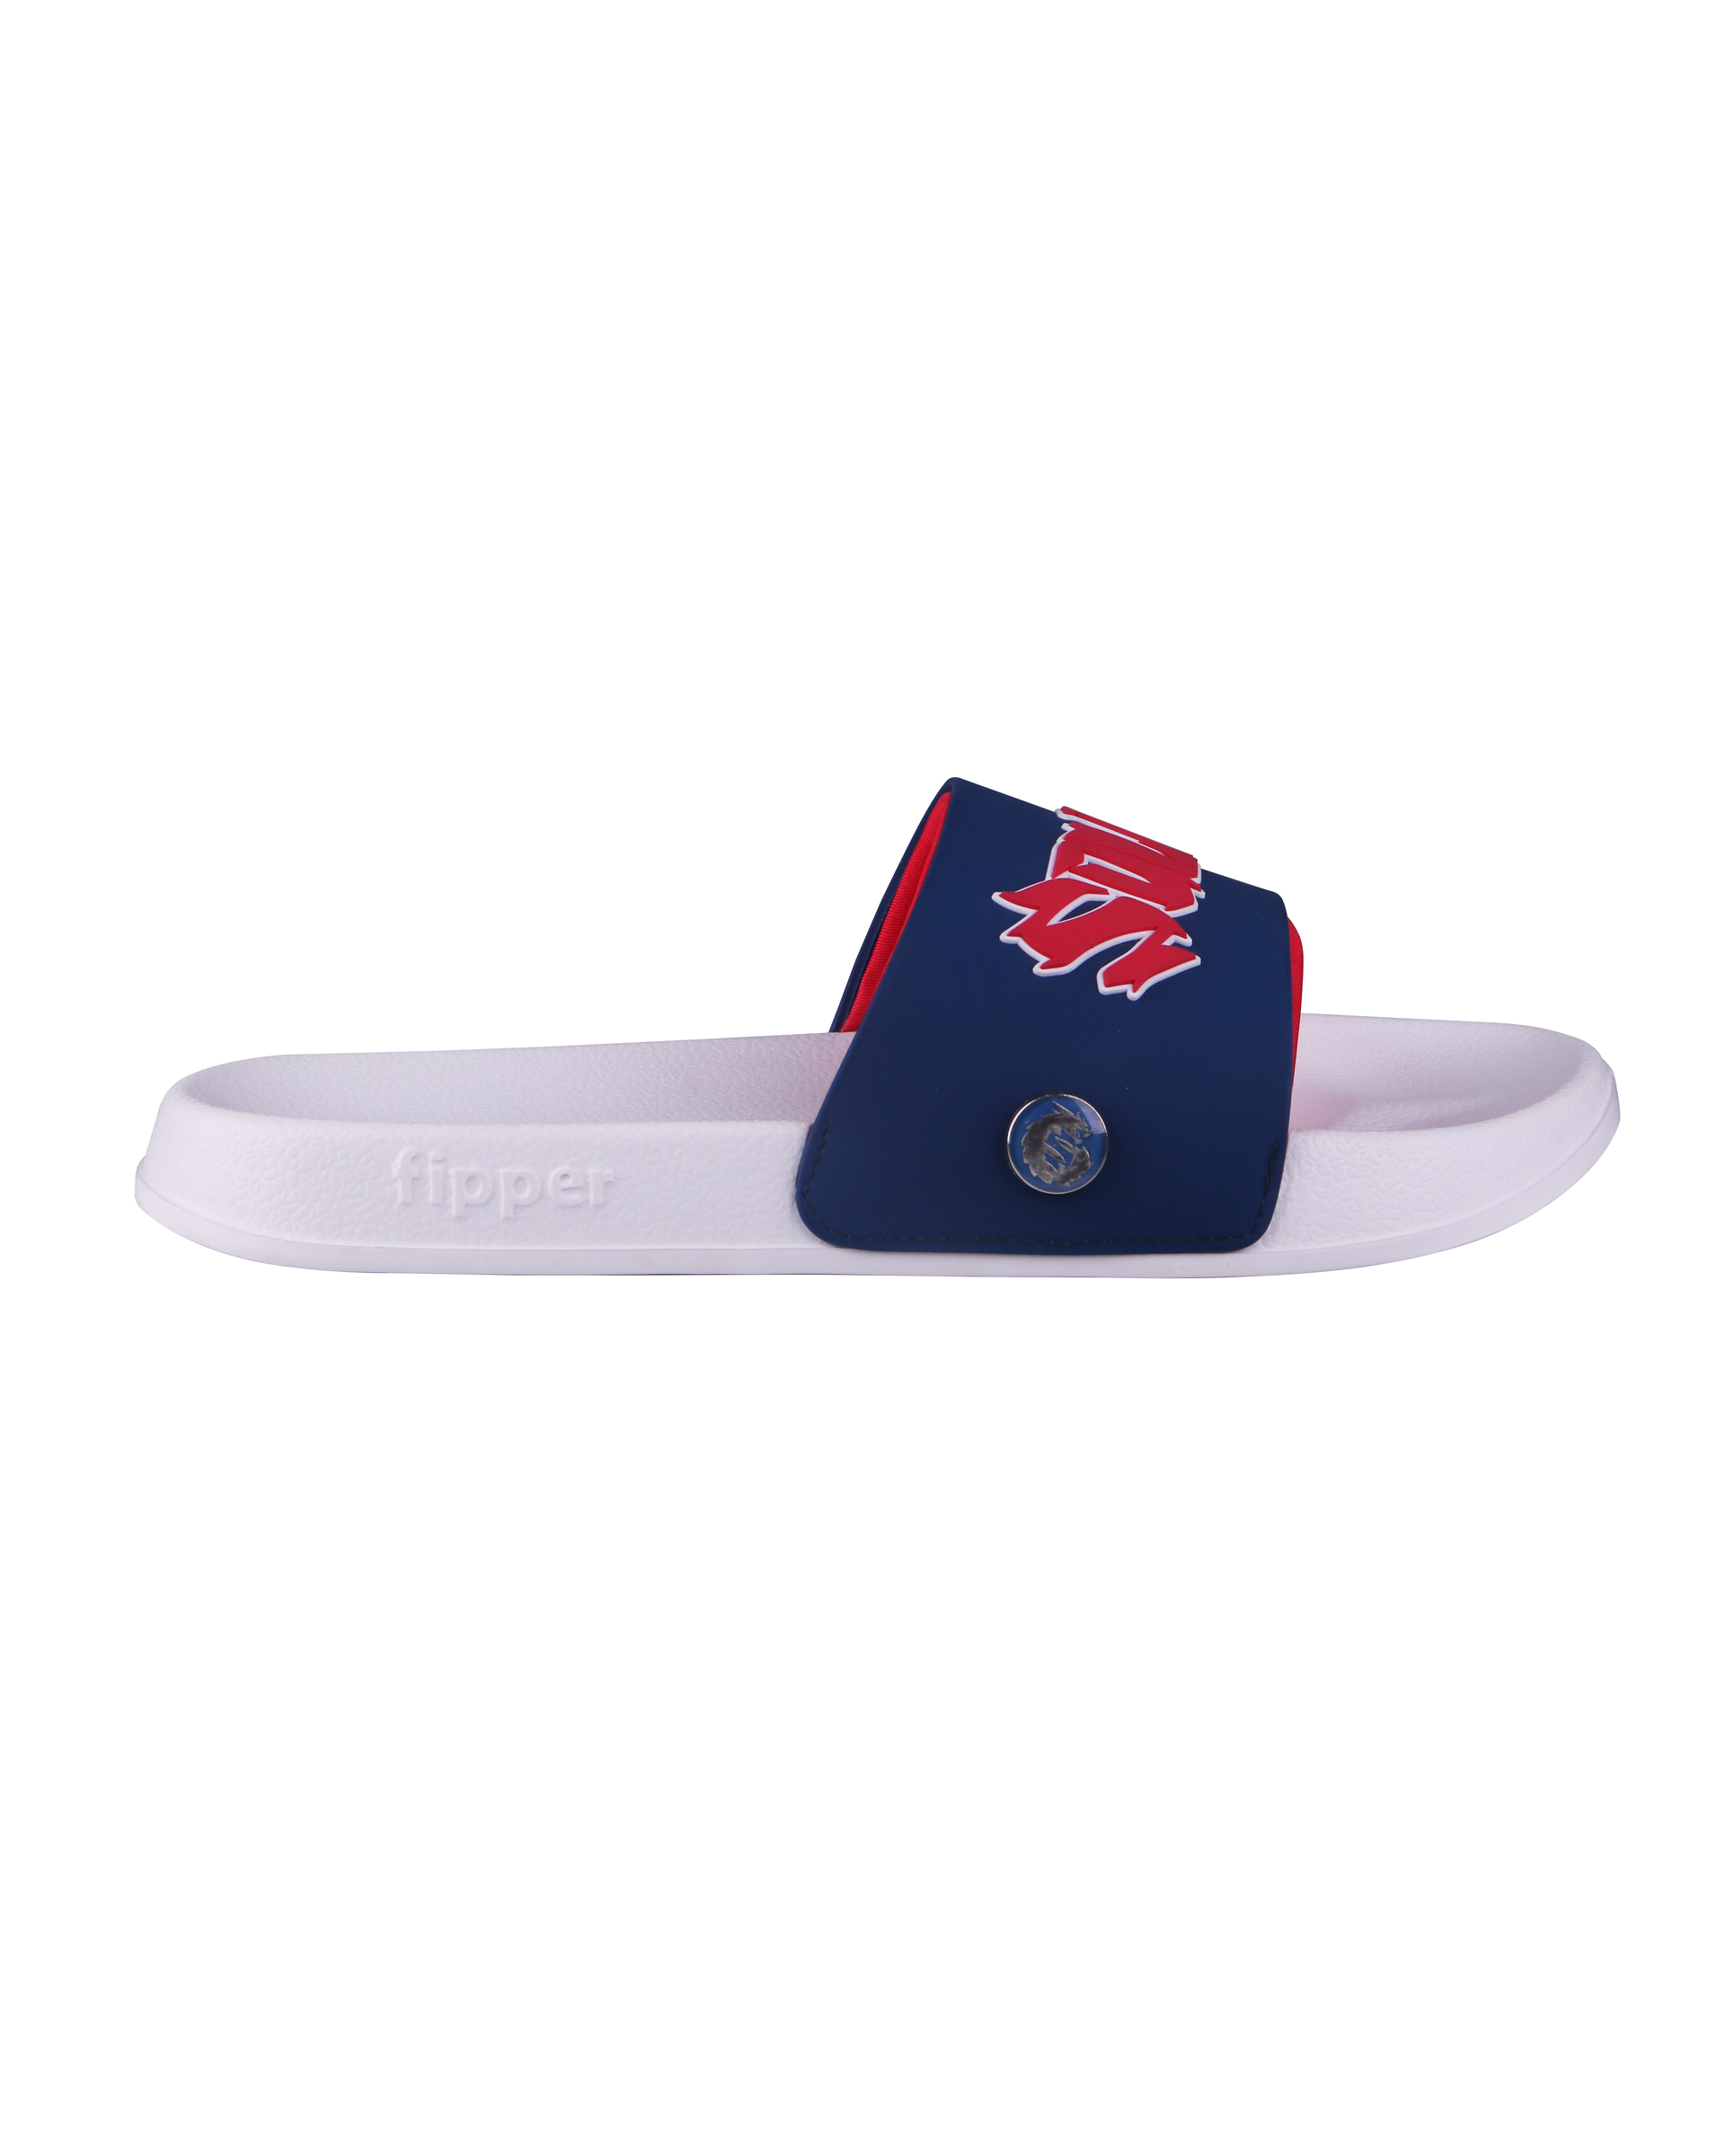 Fipper X Soloz Limited Edition Slip On in White / Blue (Marine) / Red (Debian) + Exclusive Drawstring Bag